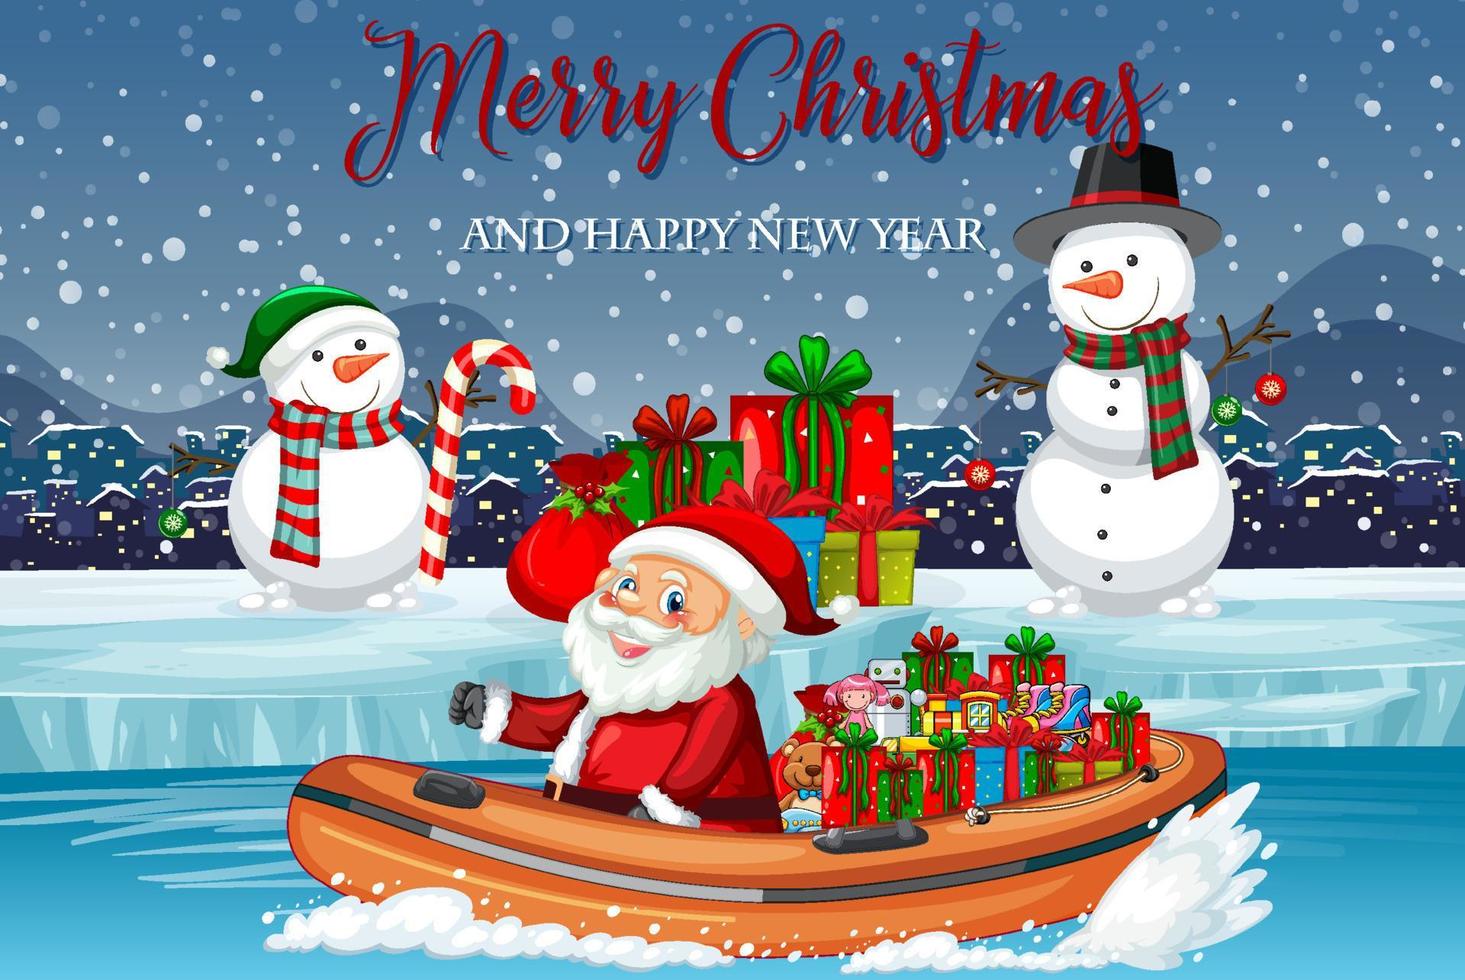 Merry Christmas poster with Santa delivering gifts by boat vector